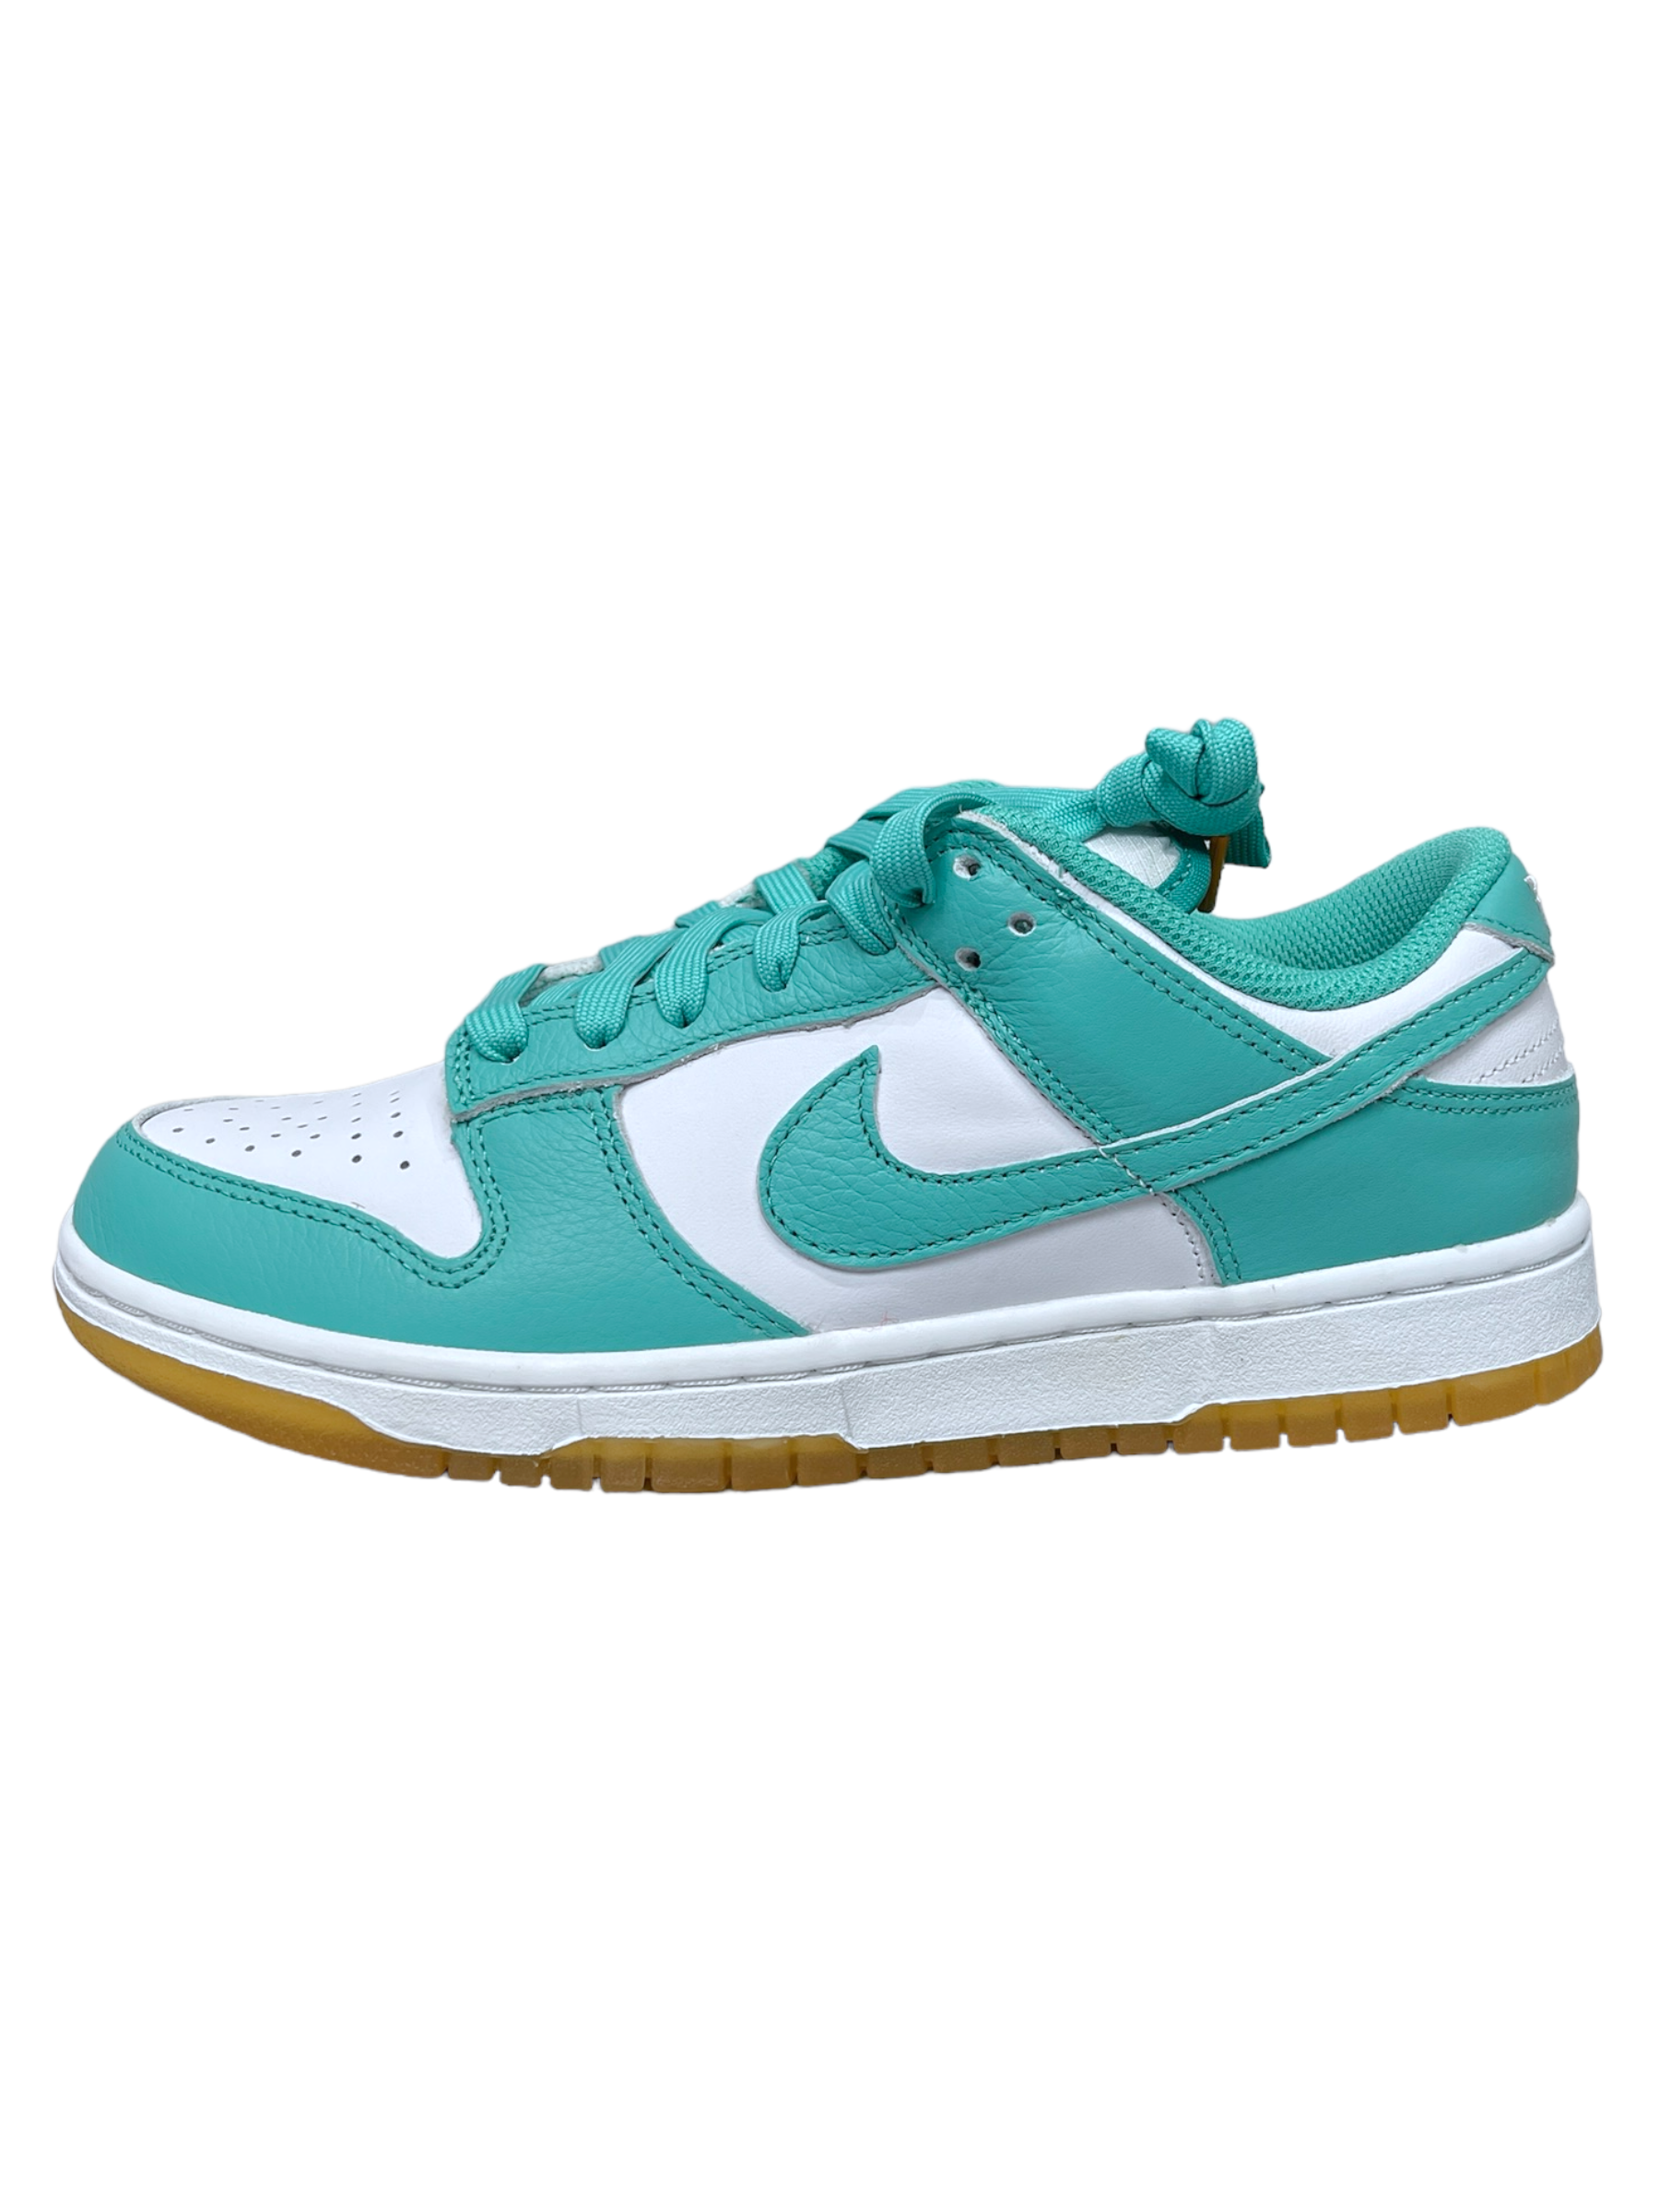 Nike Dunk Low Teal Zeal - Genuine Design Luxury Consignment for Men. New & Pre-Owned Clothing, Shoes, & Accessories. Calgary, Canada